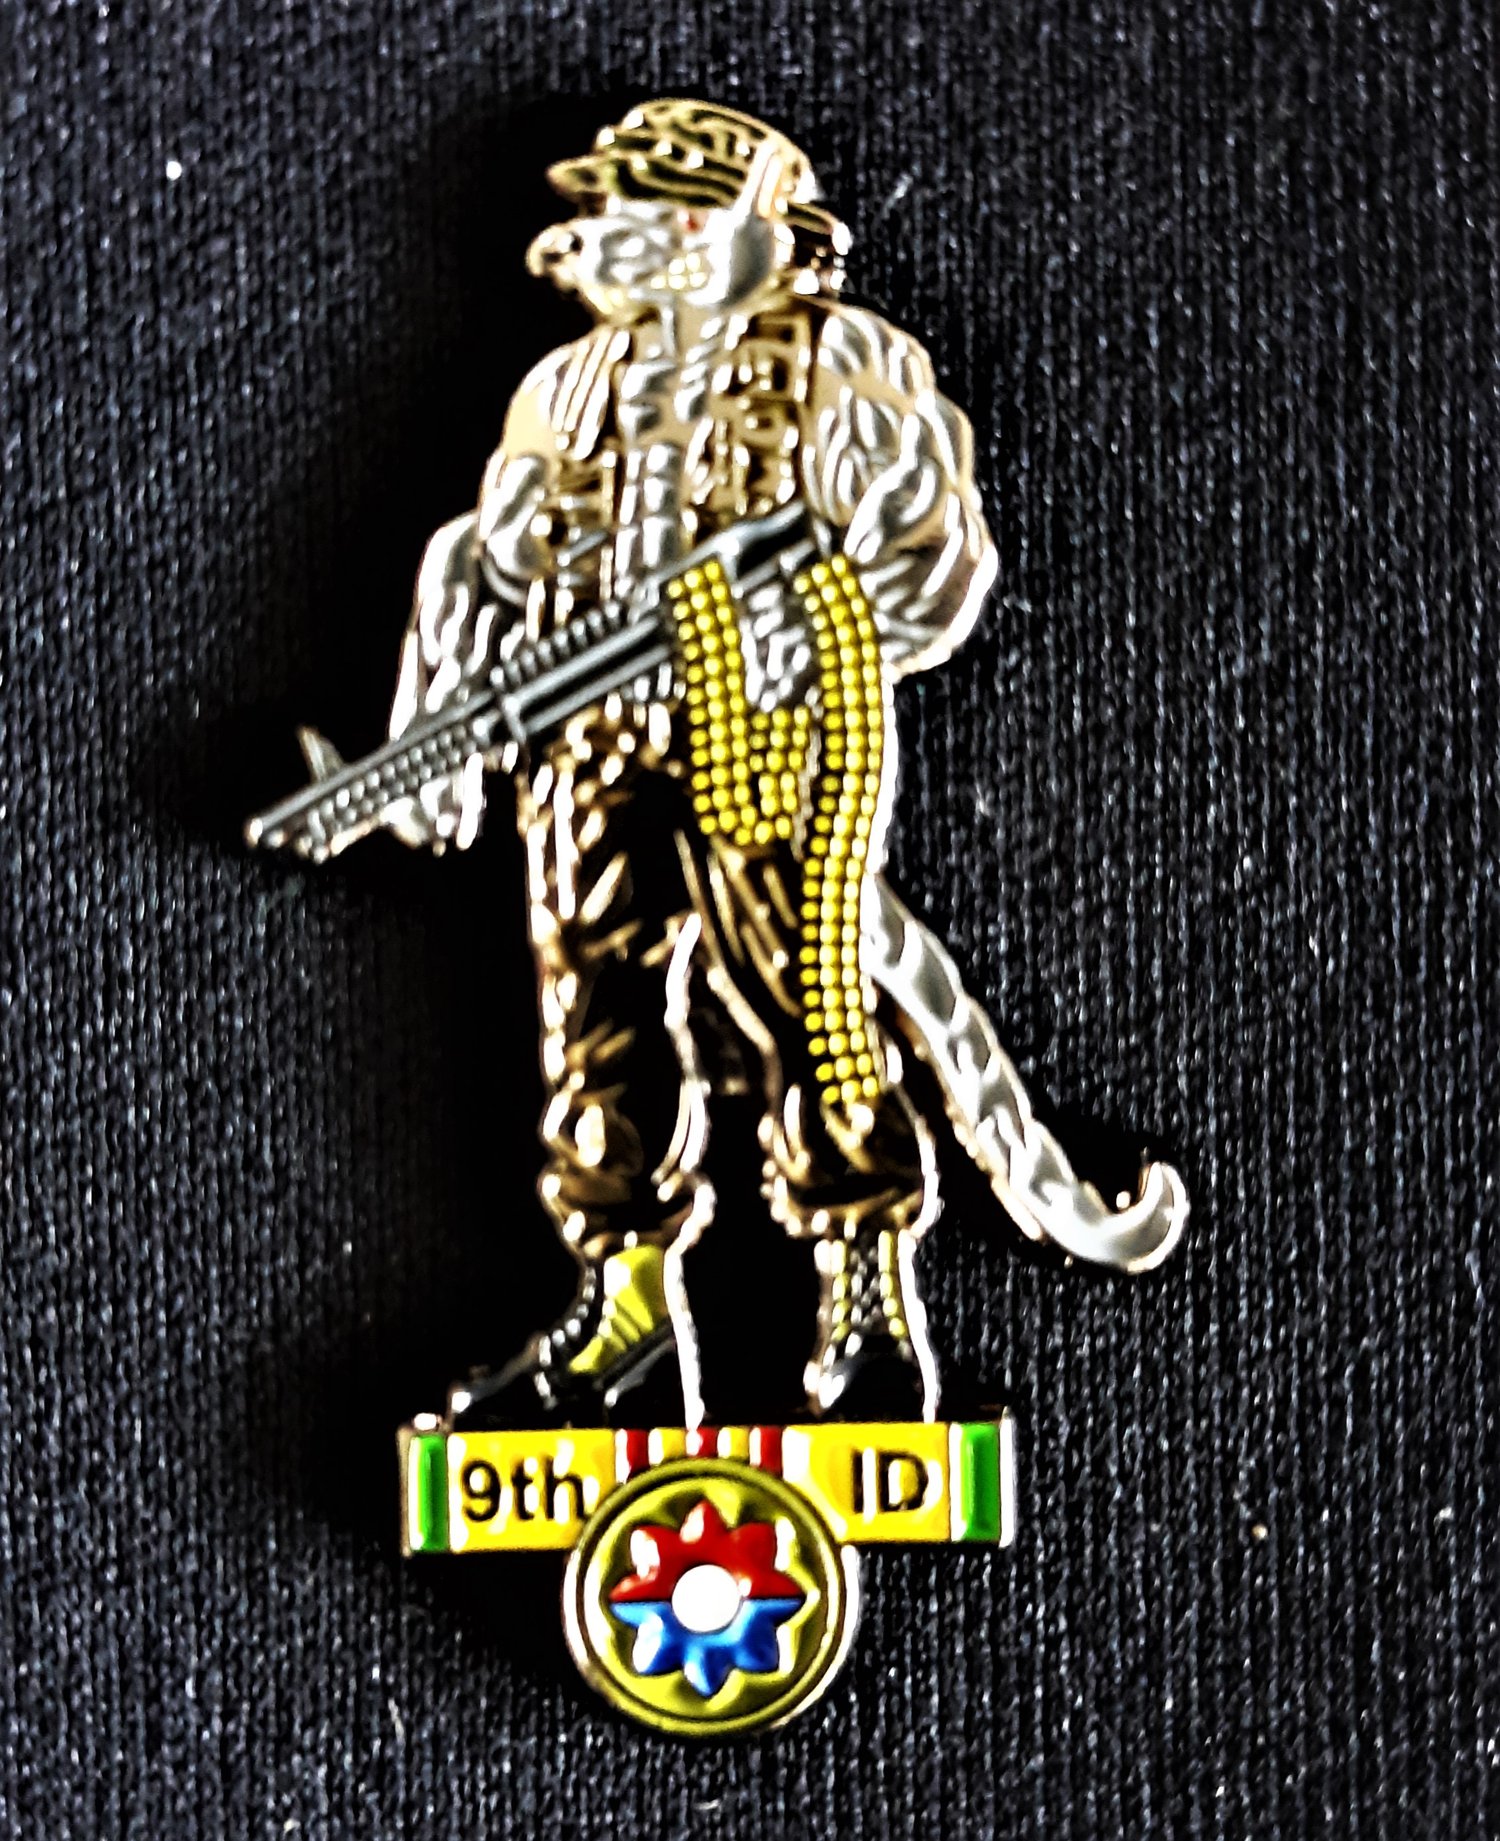 Image of Vietnam Veteran 9th Infantry Division Army River Rats Pin (Mobile Riverine Force)